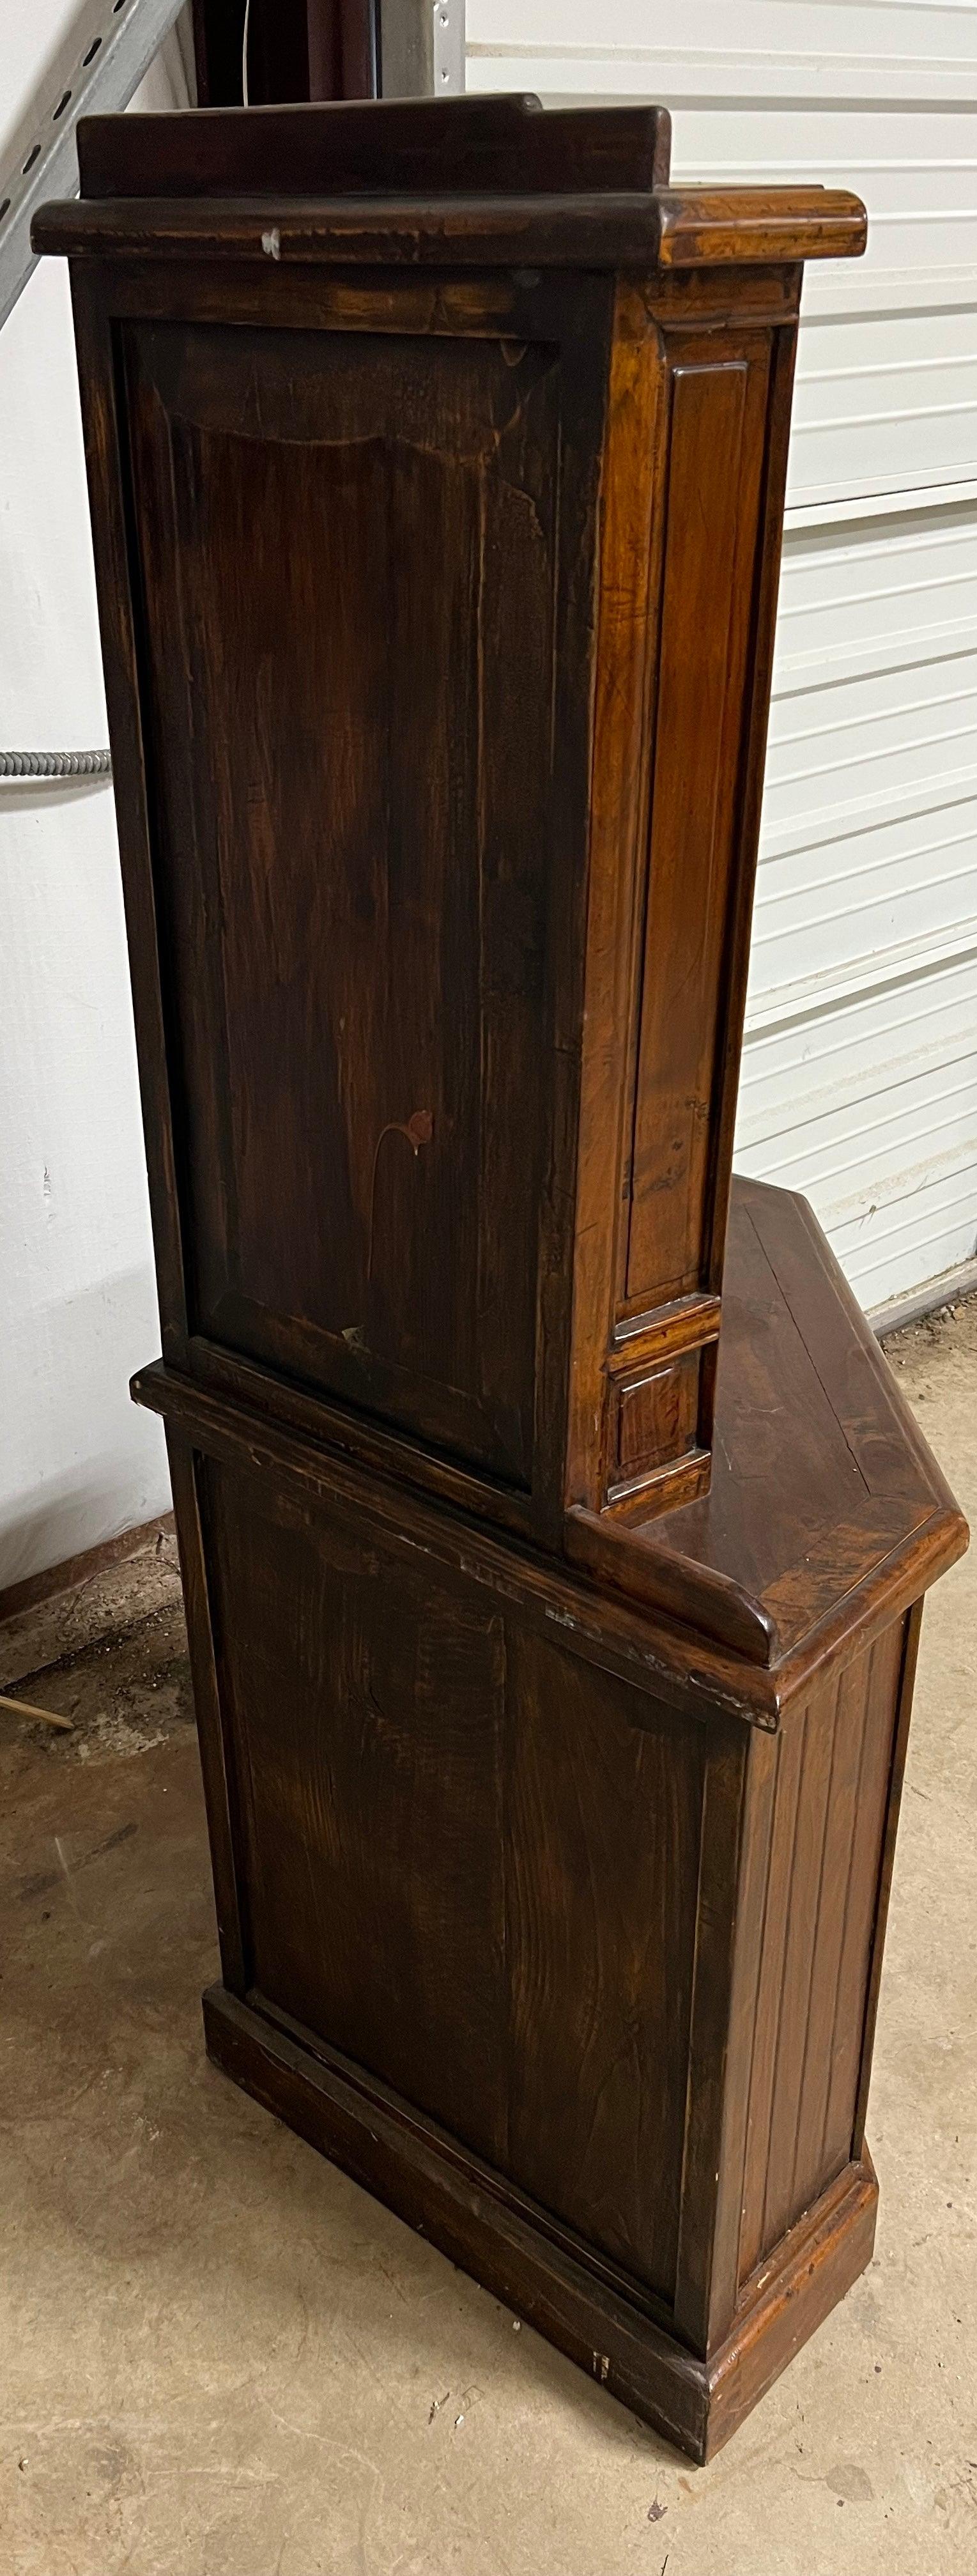 20th Century Colonial Style Corner Cabinet - The White Barn Antiques